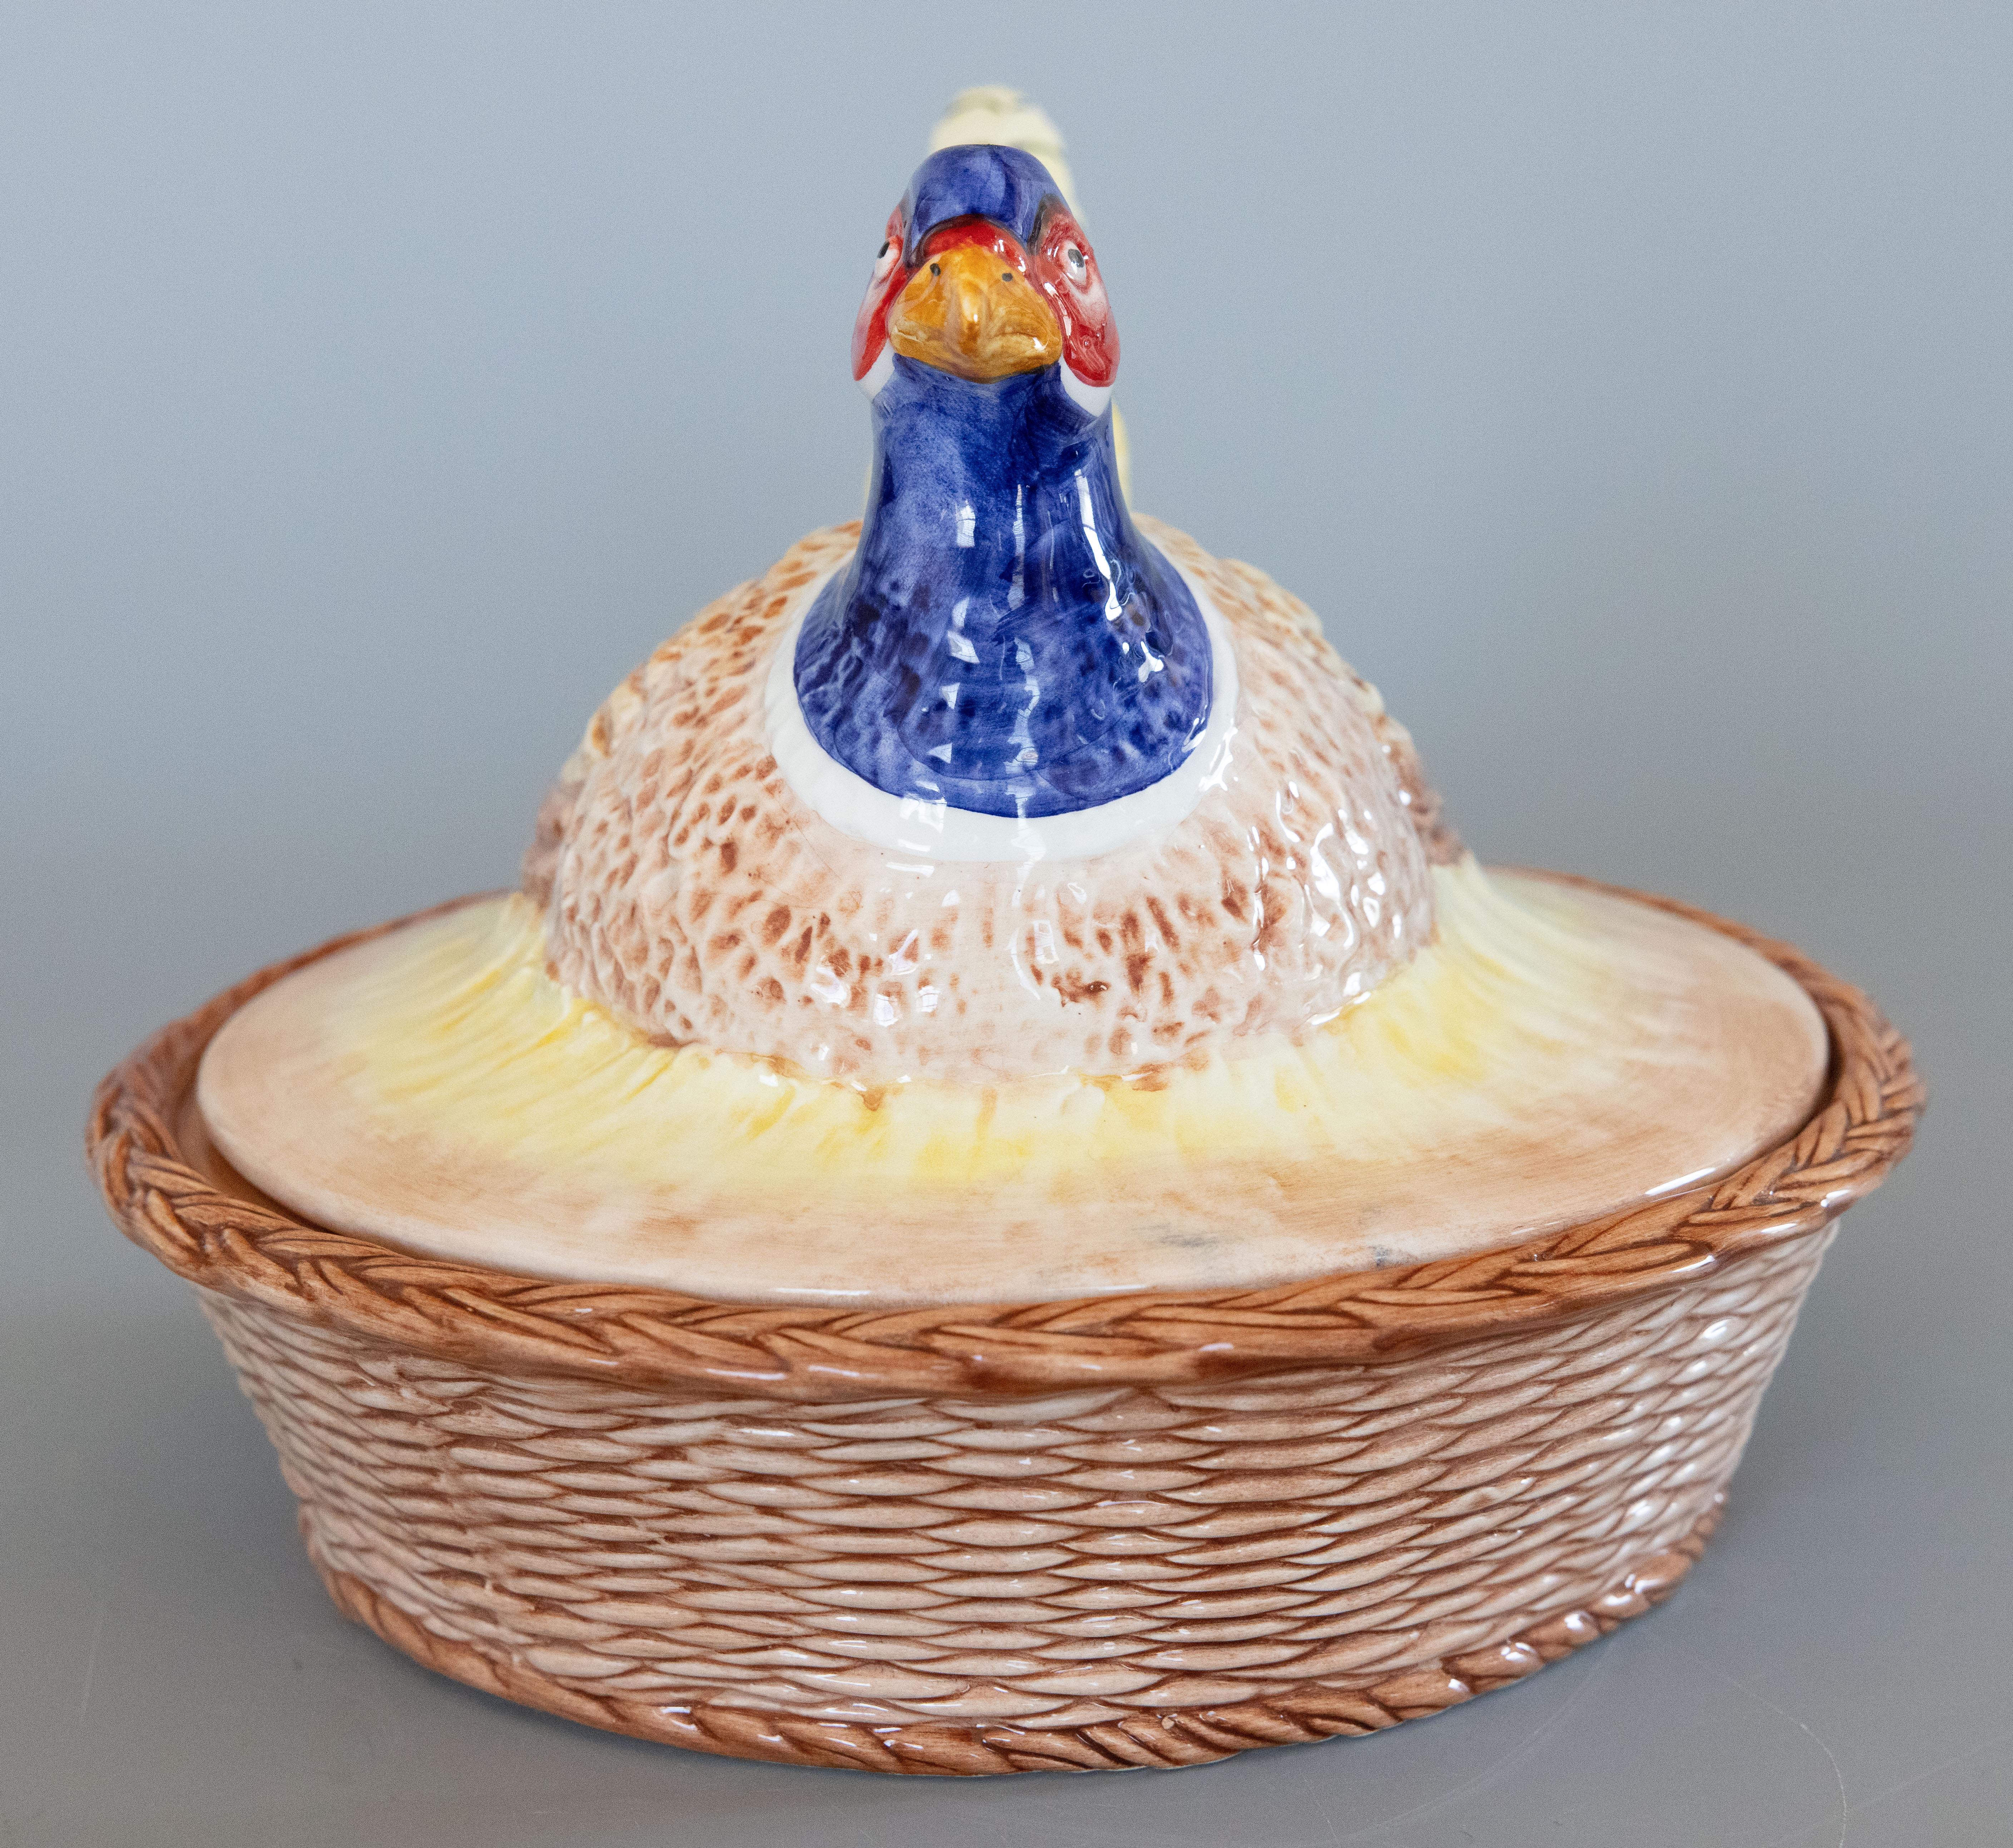 Mid-20th Century Italian Majolica Pheasant Basket Lidded Dish Centerpiece In Good Condition For Sale In Pearland, TX